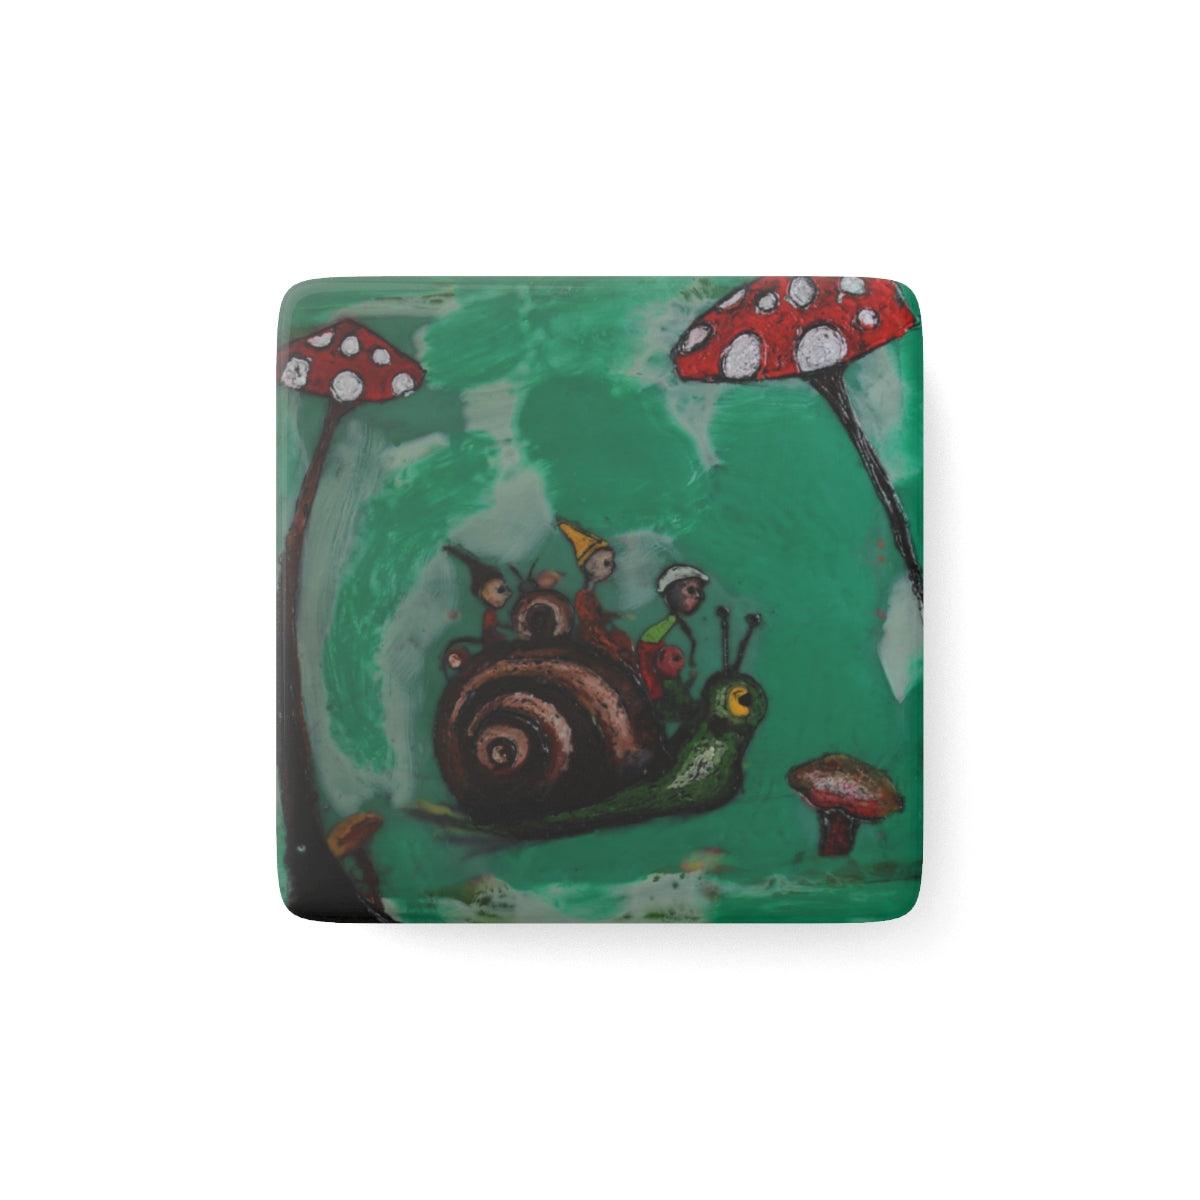 "Hurry Up! We are going to be Late" Porcelain Magnet, Square-Home Decor - Mike Giannella - Encaustic Painting - Mixed Media Artist - Art Prints